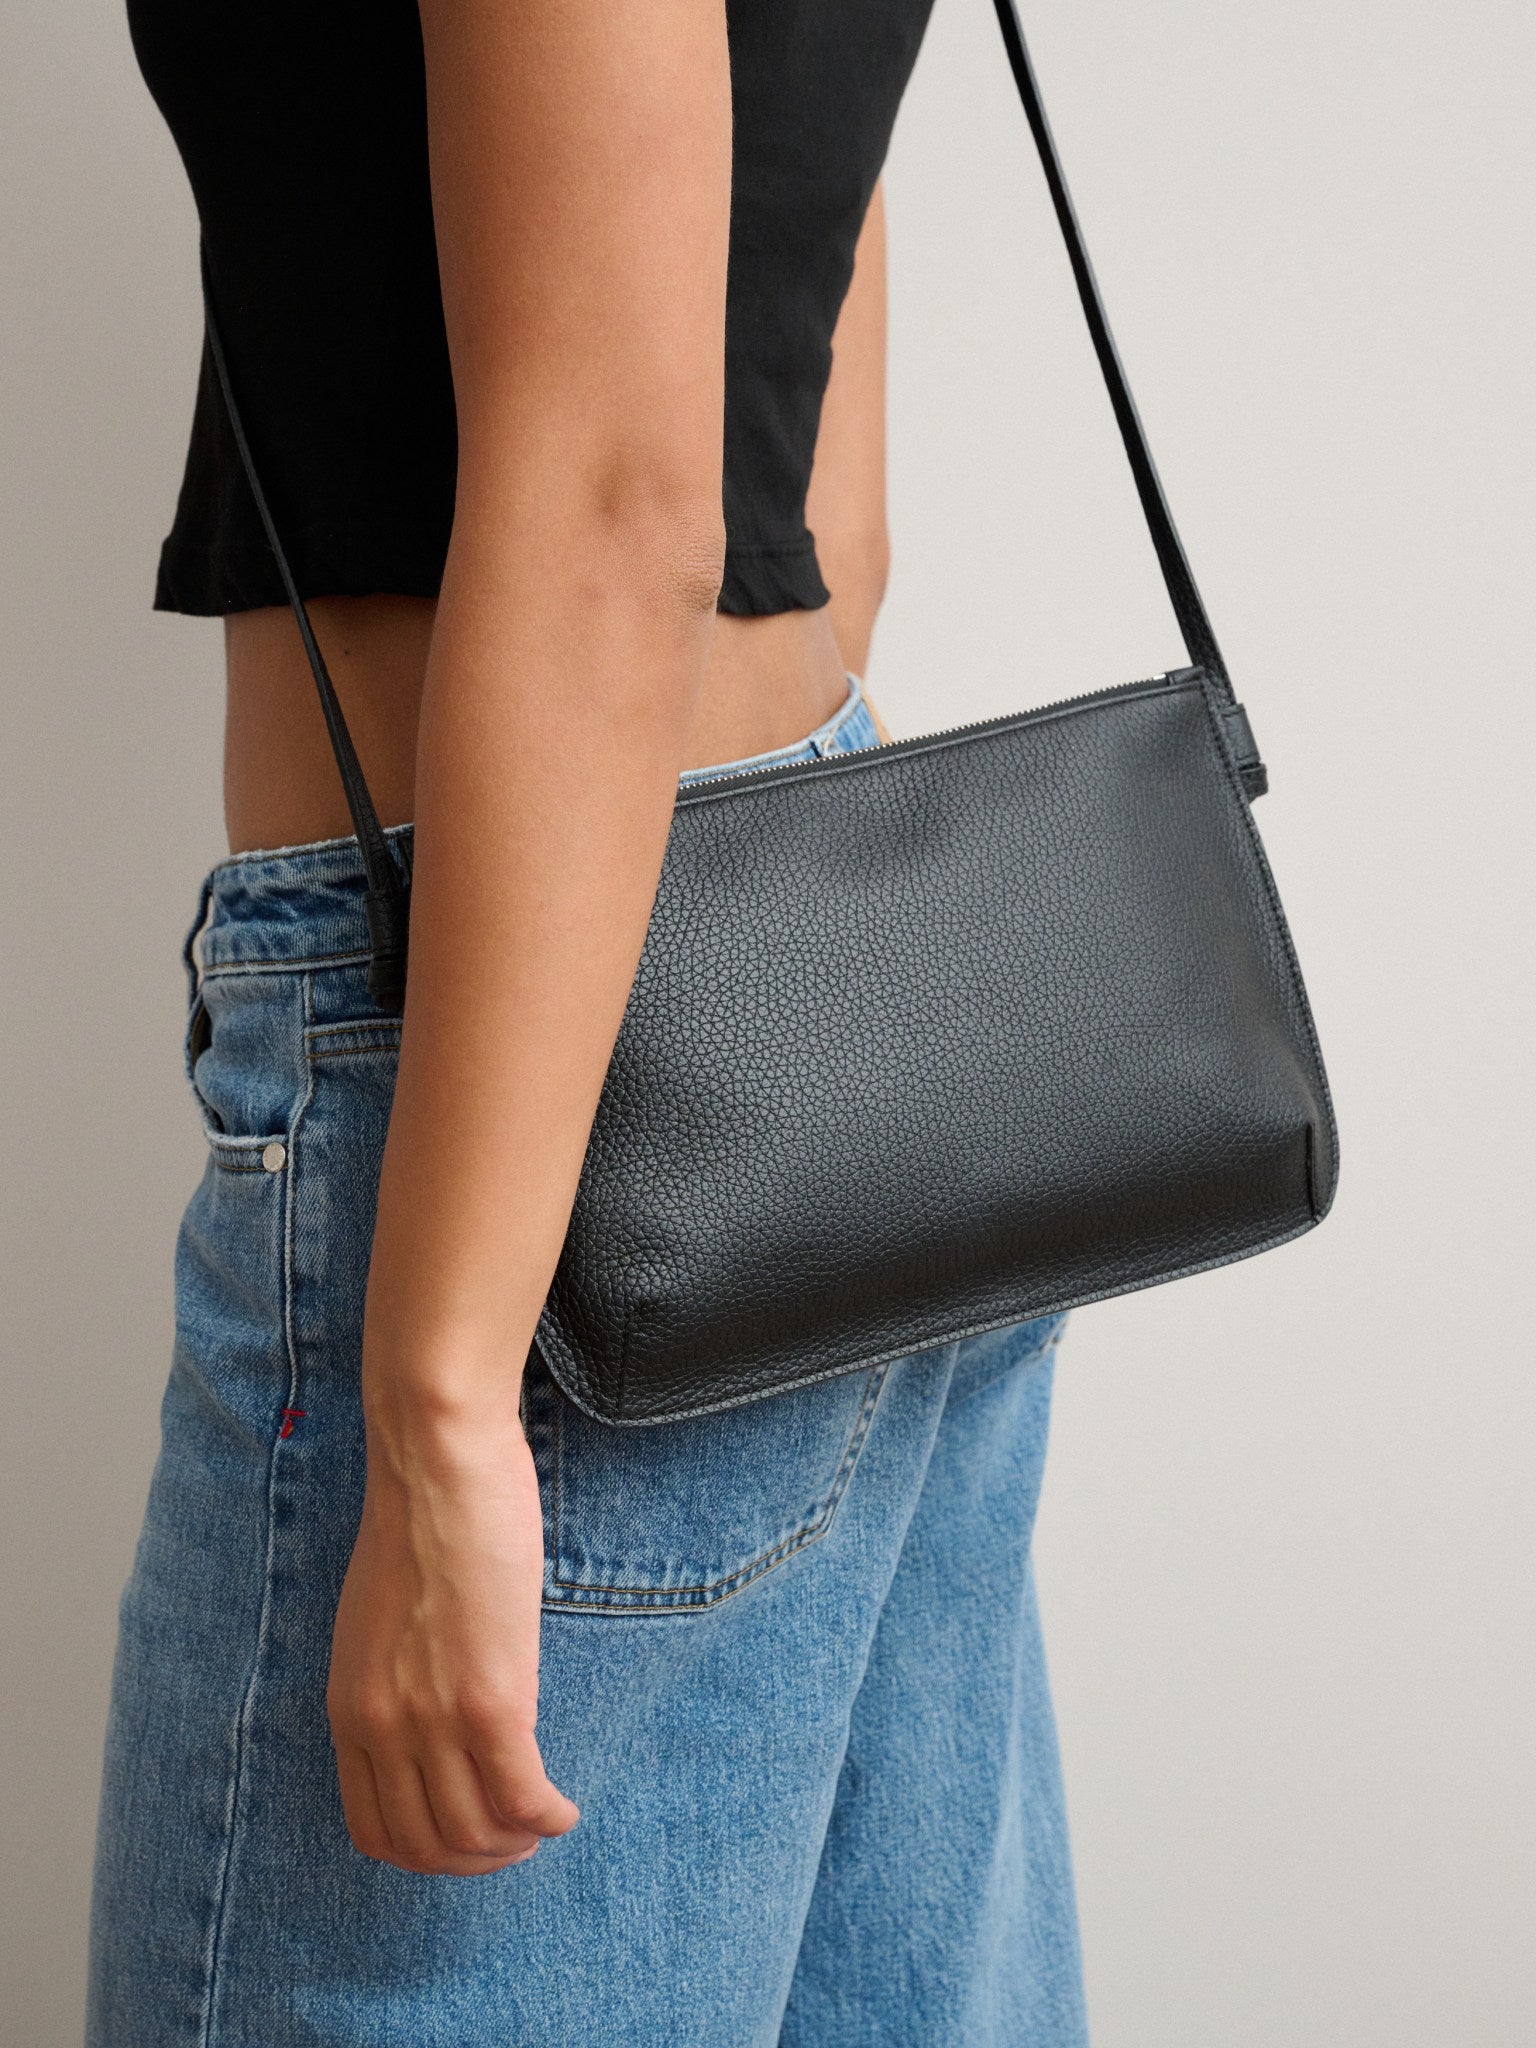 Women's Large Black Leather Purse By Holly Rose | notonthehighstreet.com